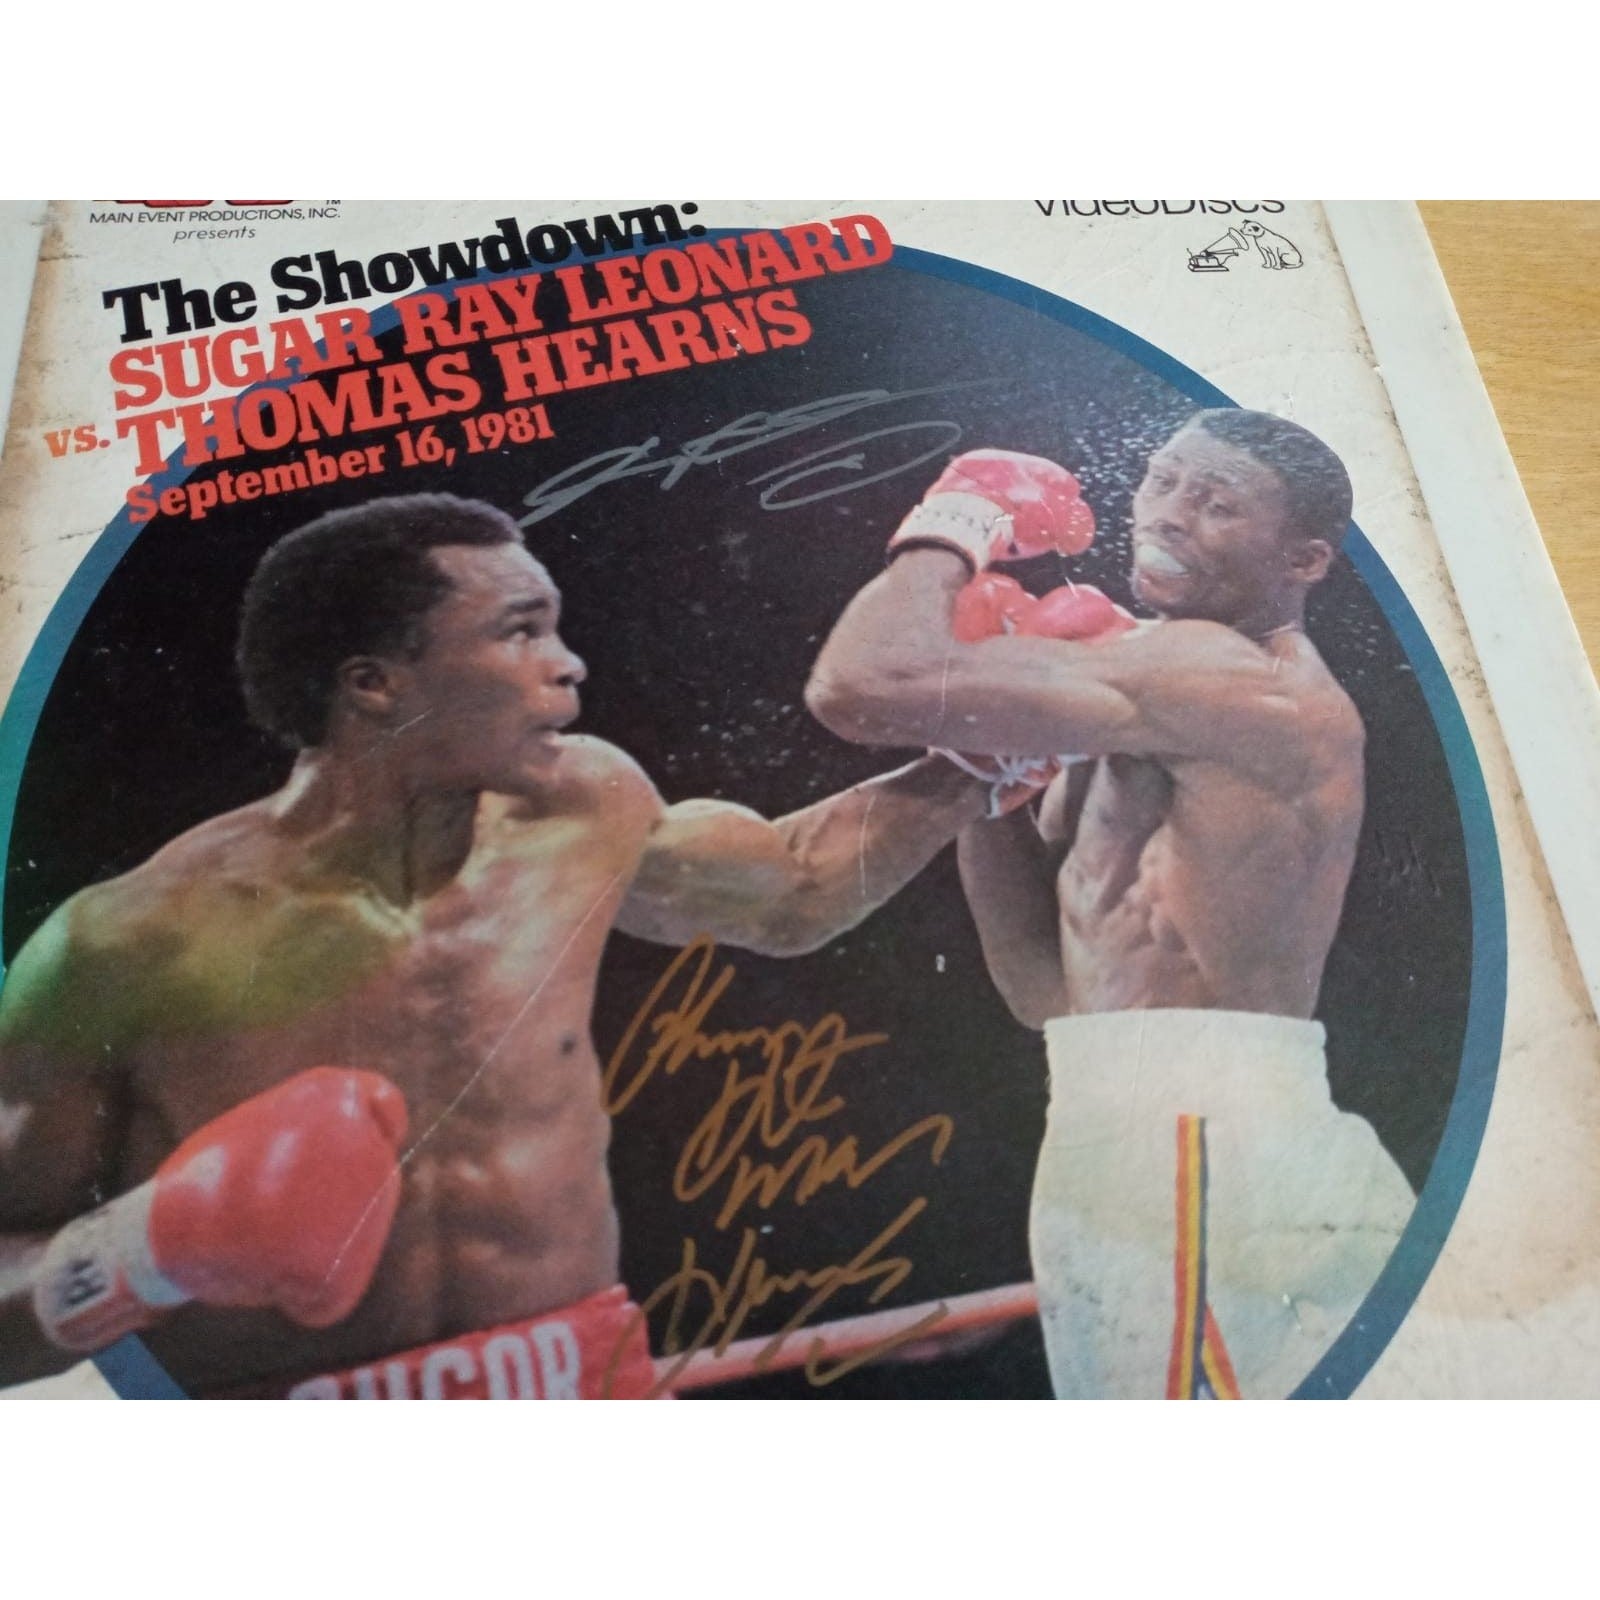 Sugar Ray Leonard and Thomas Hearns RCA video disc signed with proof